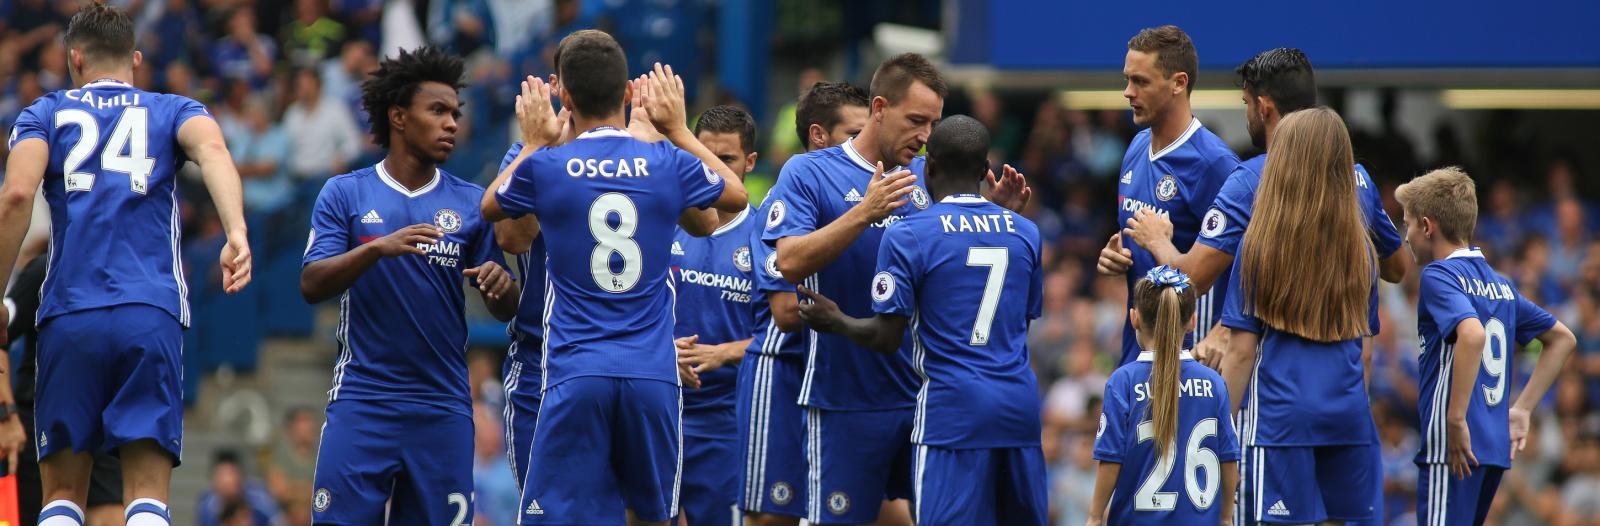 Shying away from ‘God’s chosen time for football’, fortune favours Chelsea on Friday’s